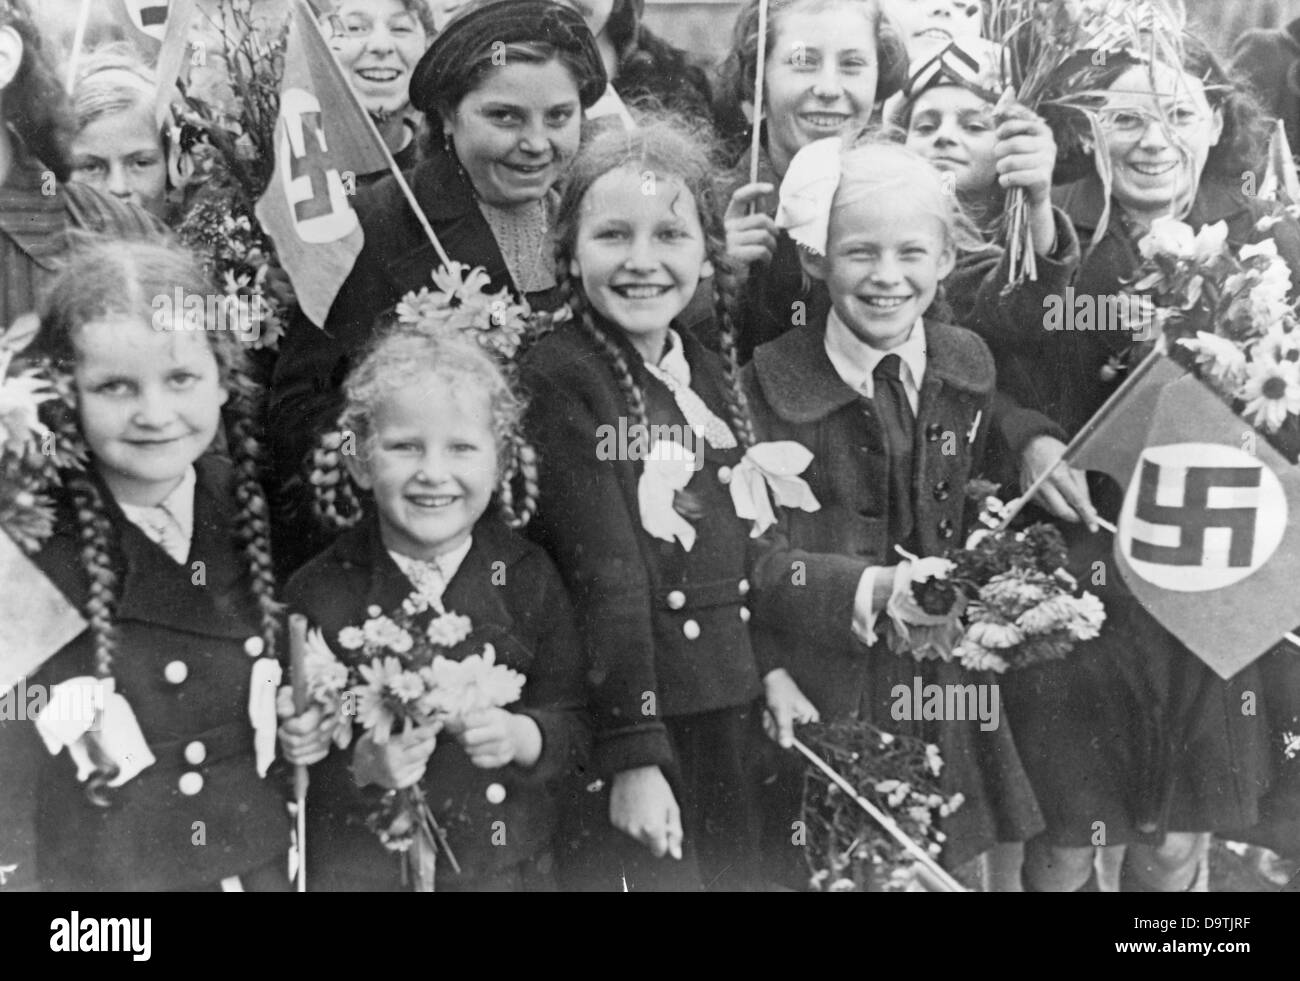 Children with swastika flags welcome the chairman of the civil administration in Lorraine, Josef Bürckel, at his arrival in Metz, in the former German part of Lorraine, on 24 September 1940. Fotoarchiv für Zeitgeschichte Stock Photo